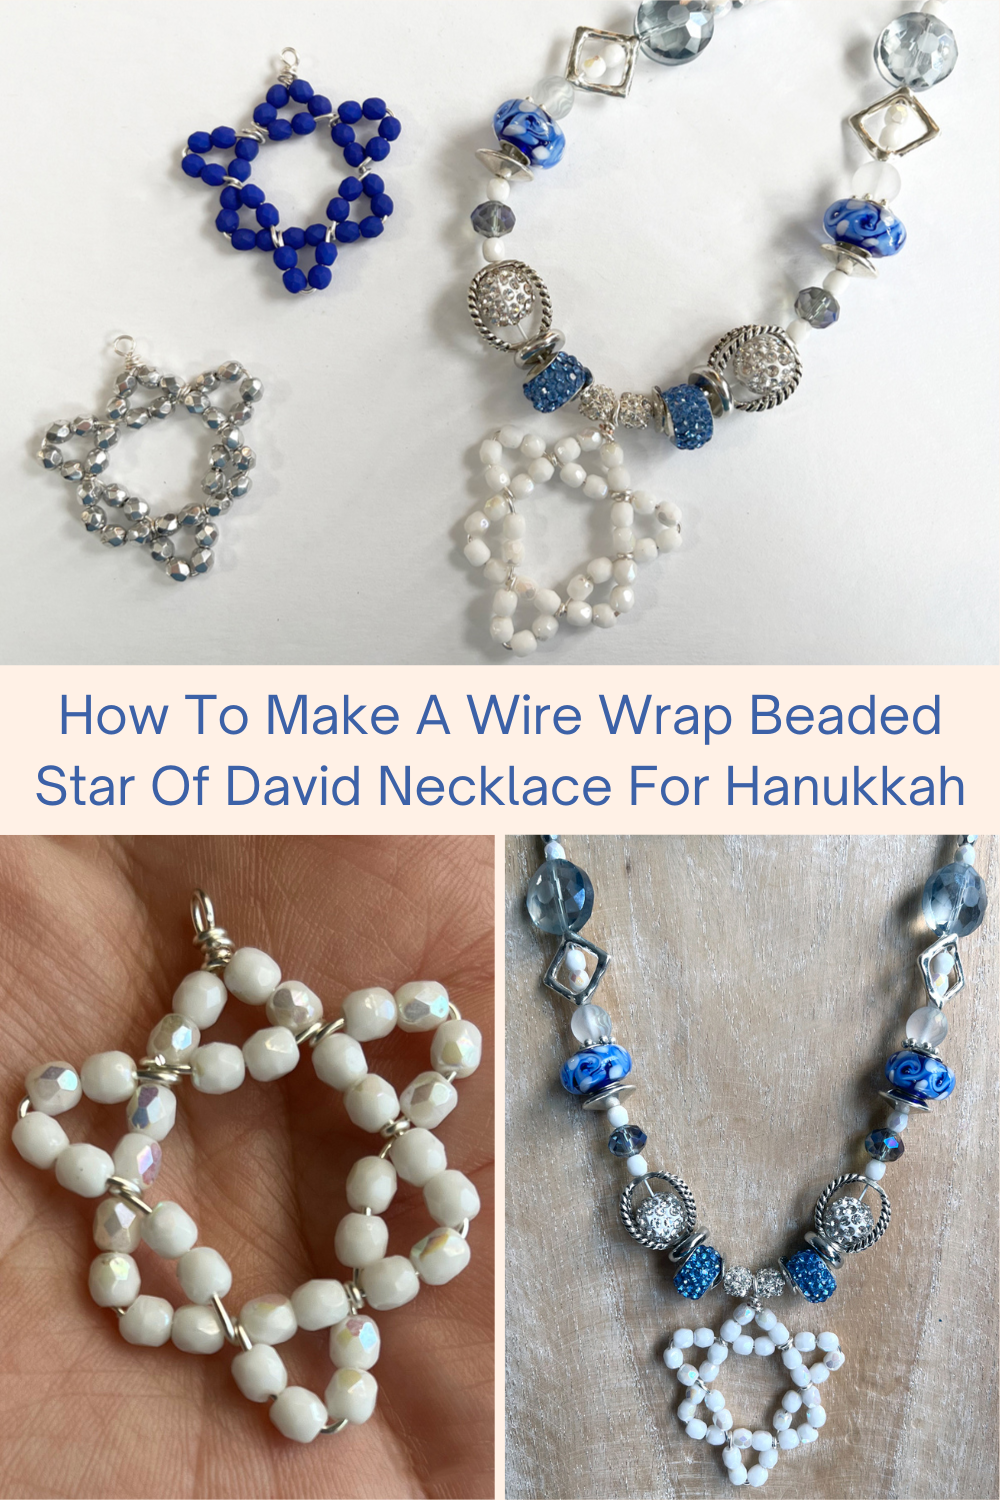 How To Make A Wire Wrap Beaded Star Of David Necklace For Hanukkah Collage